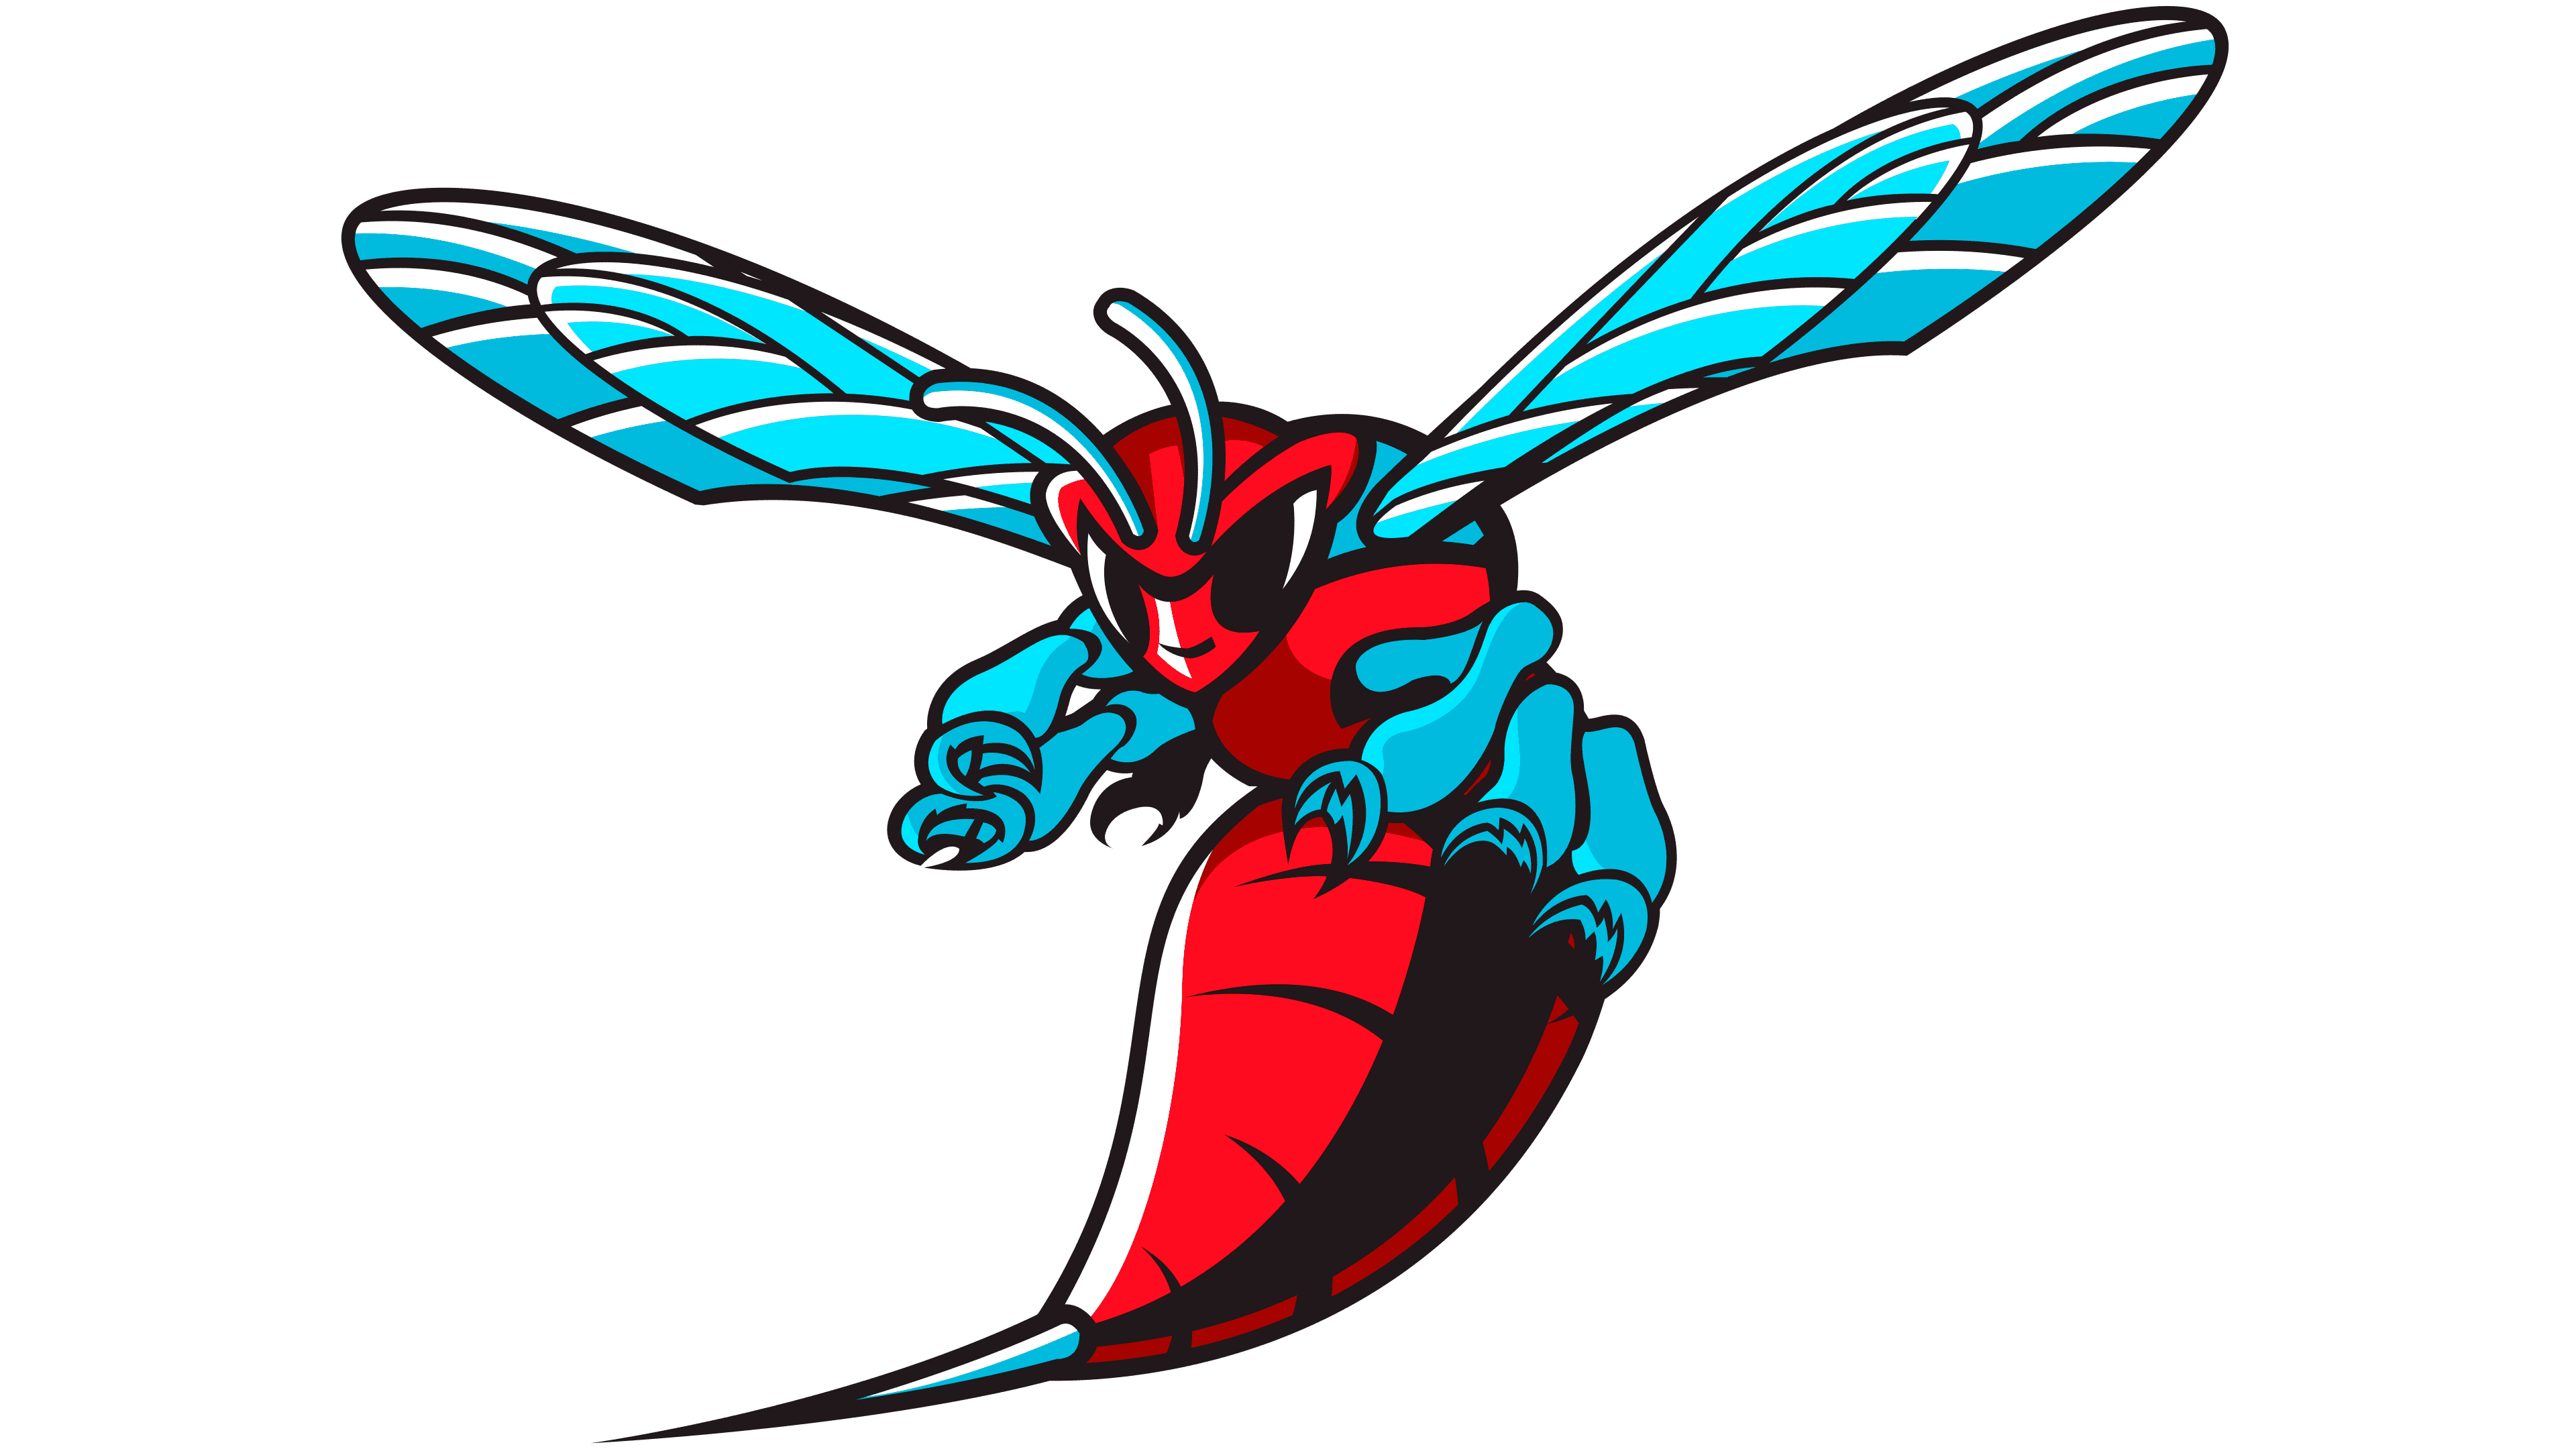 Delaware State Hornets Logo The Most Famous Brands And Company Logos In The World